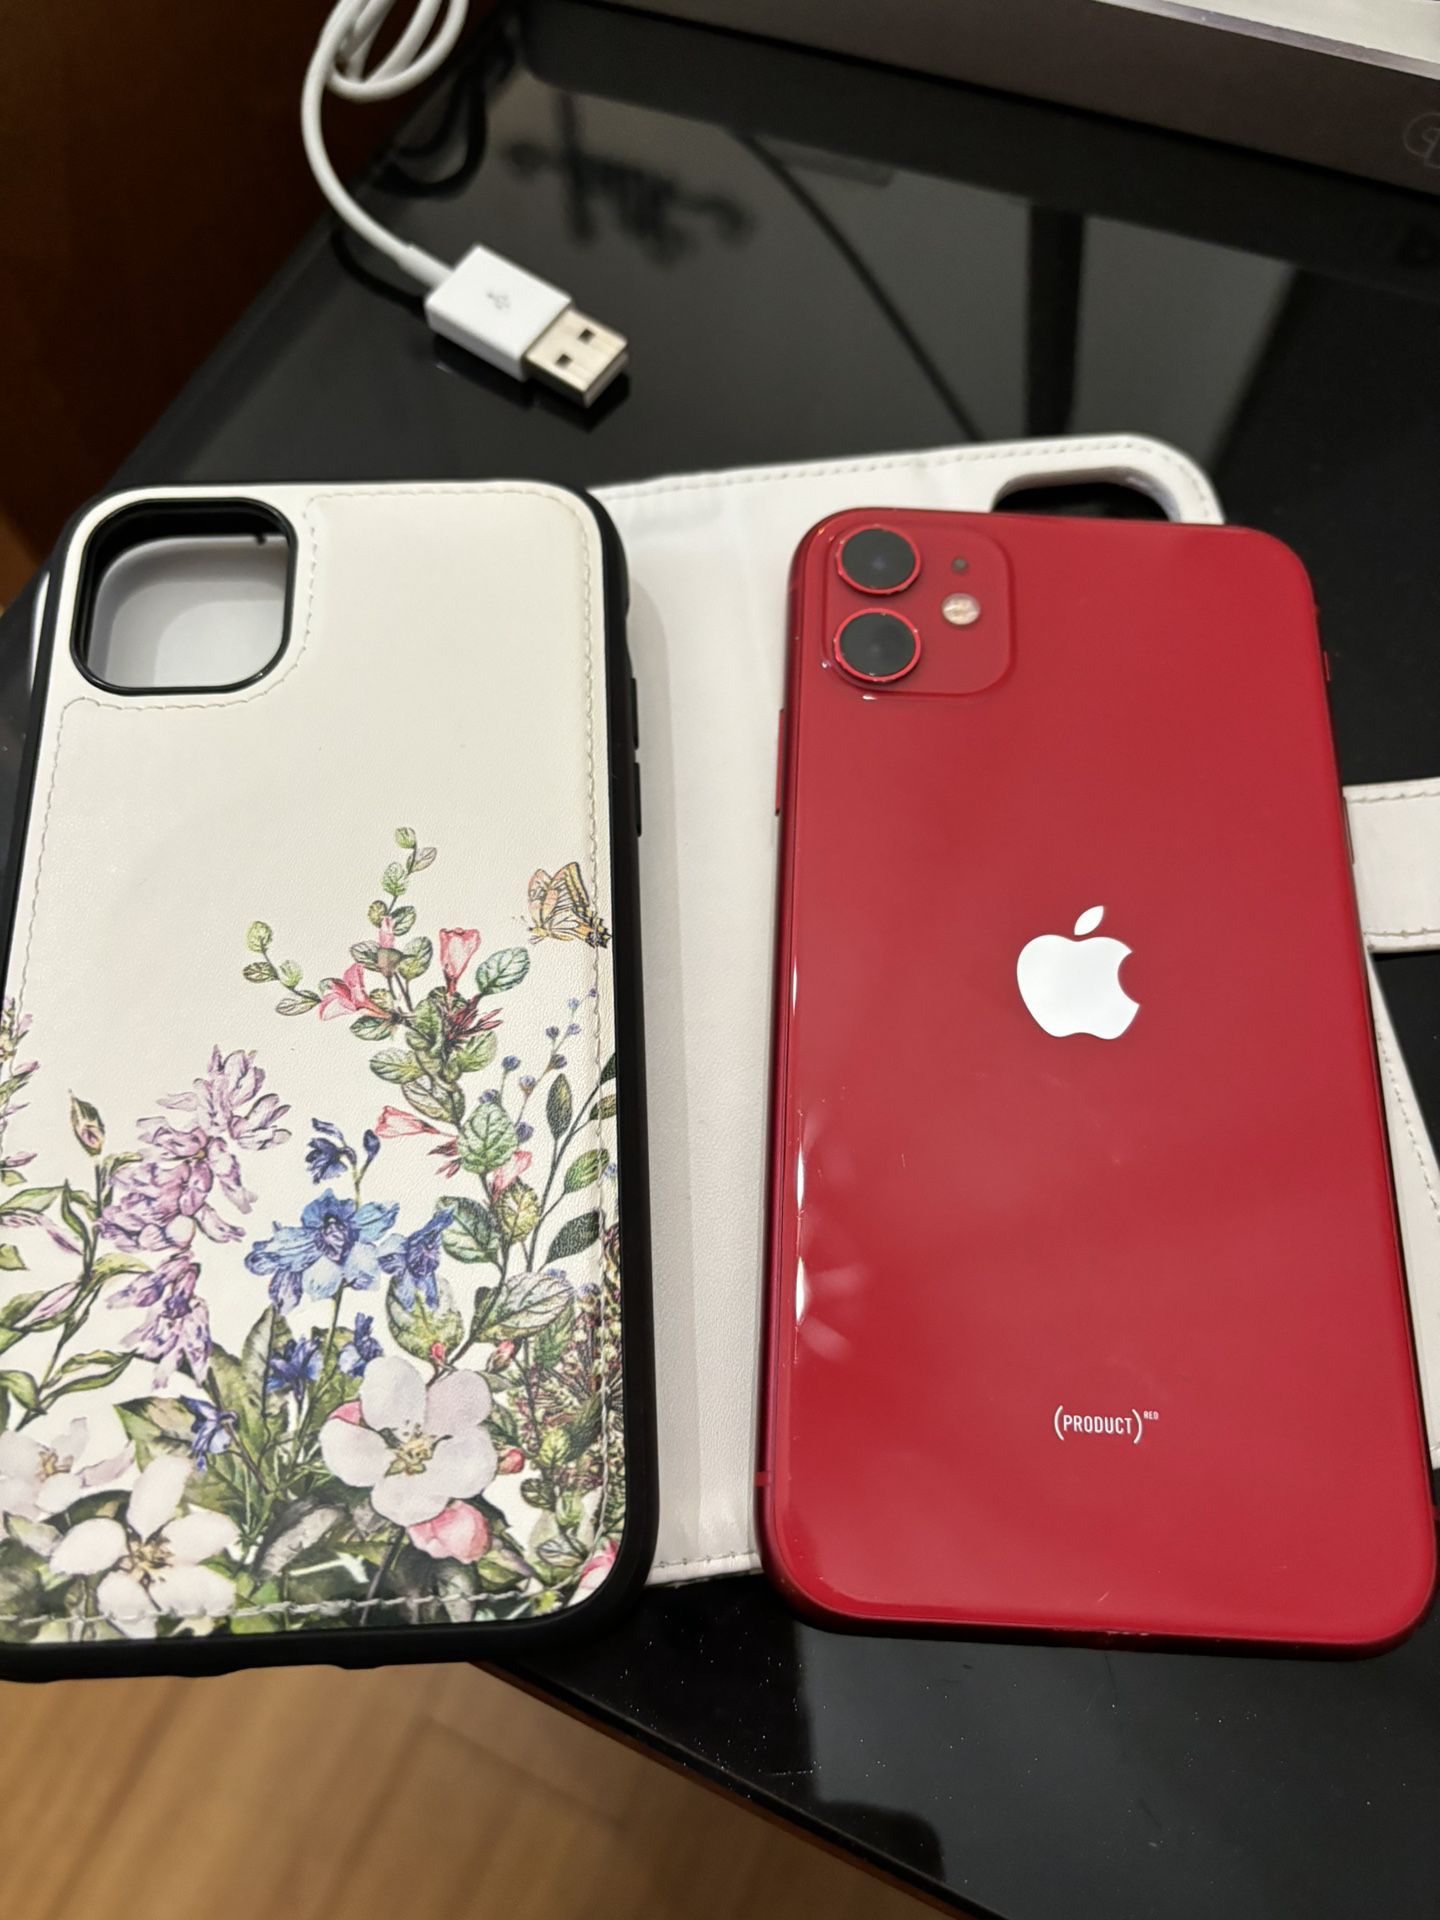 Red, 128 Gigs iPhone 11